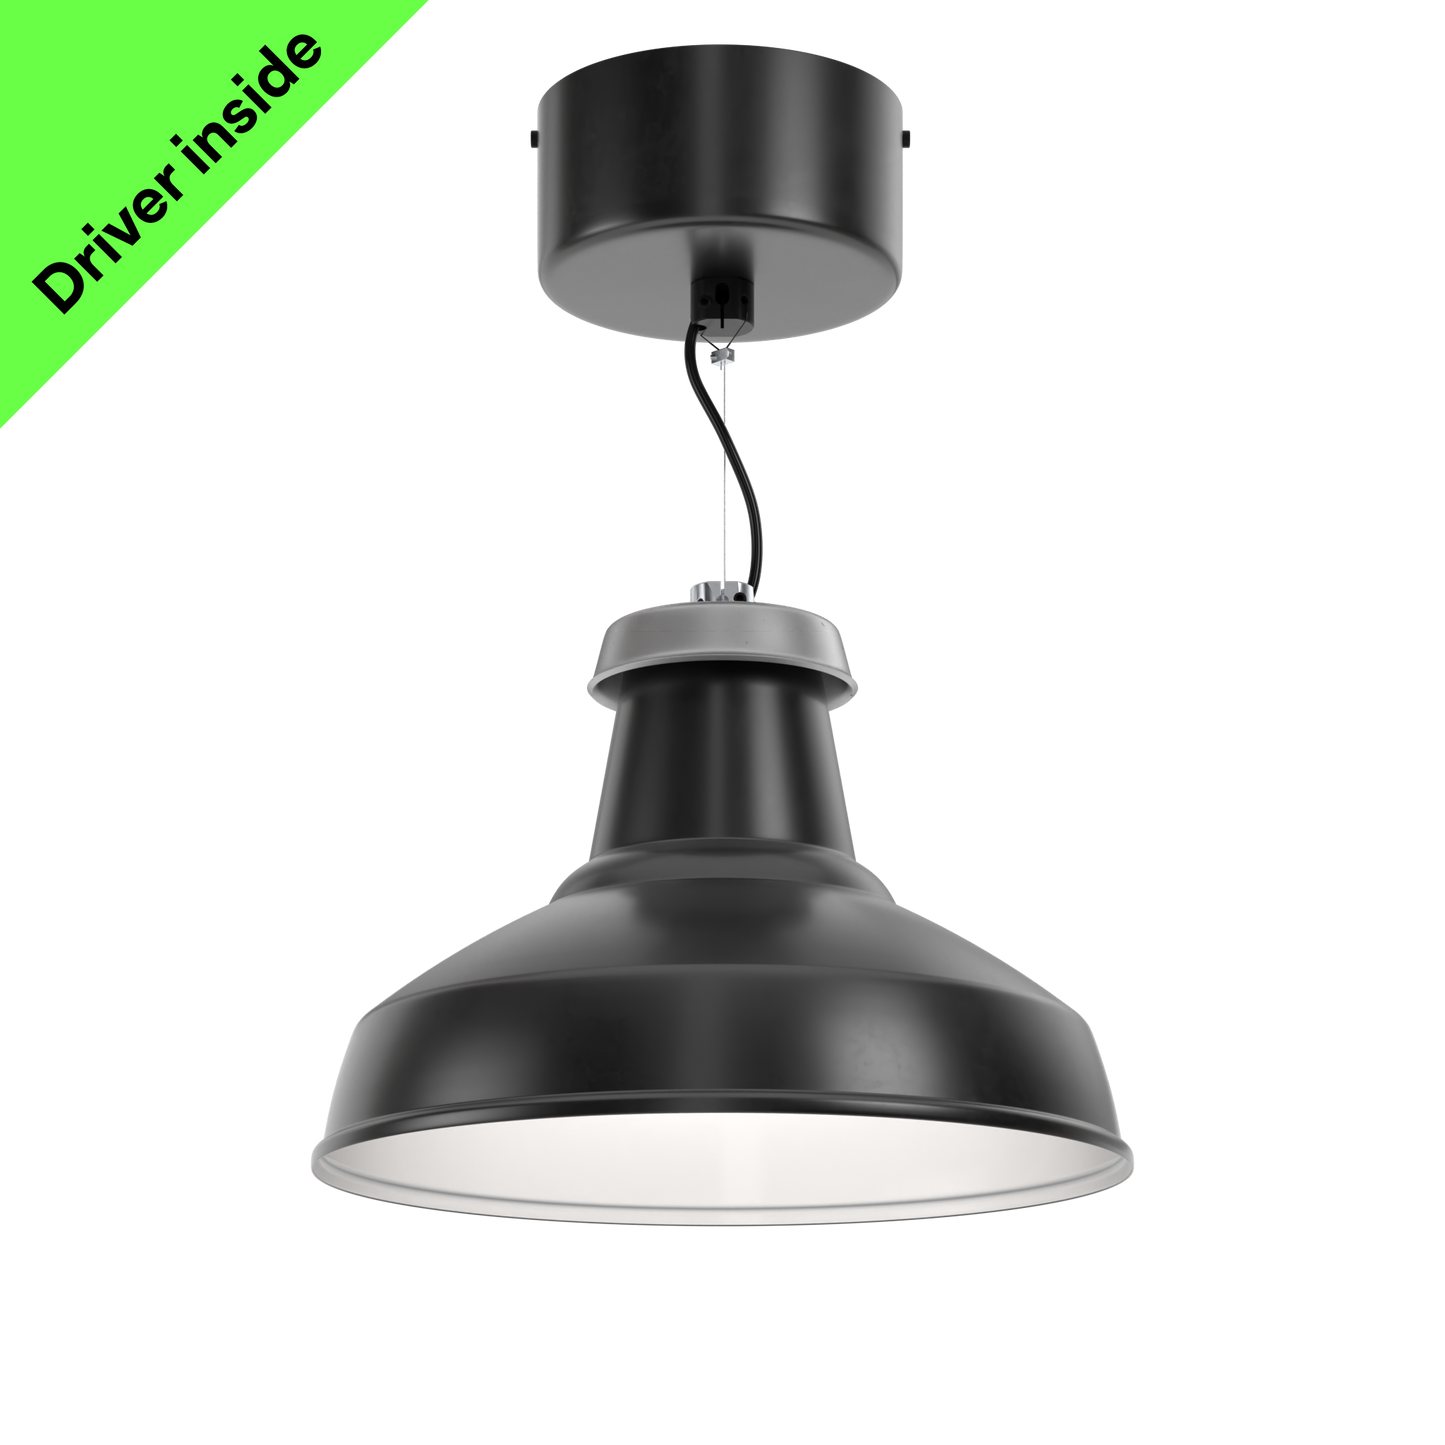 A sustainable, black, architectural pendant light  that's designed for circular economy, on a large monopoint mounting